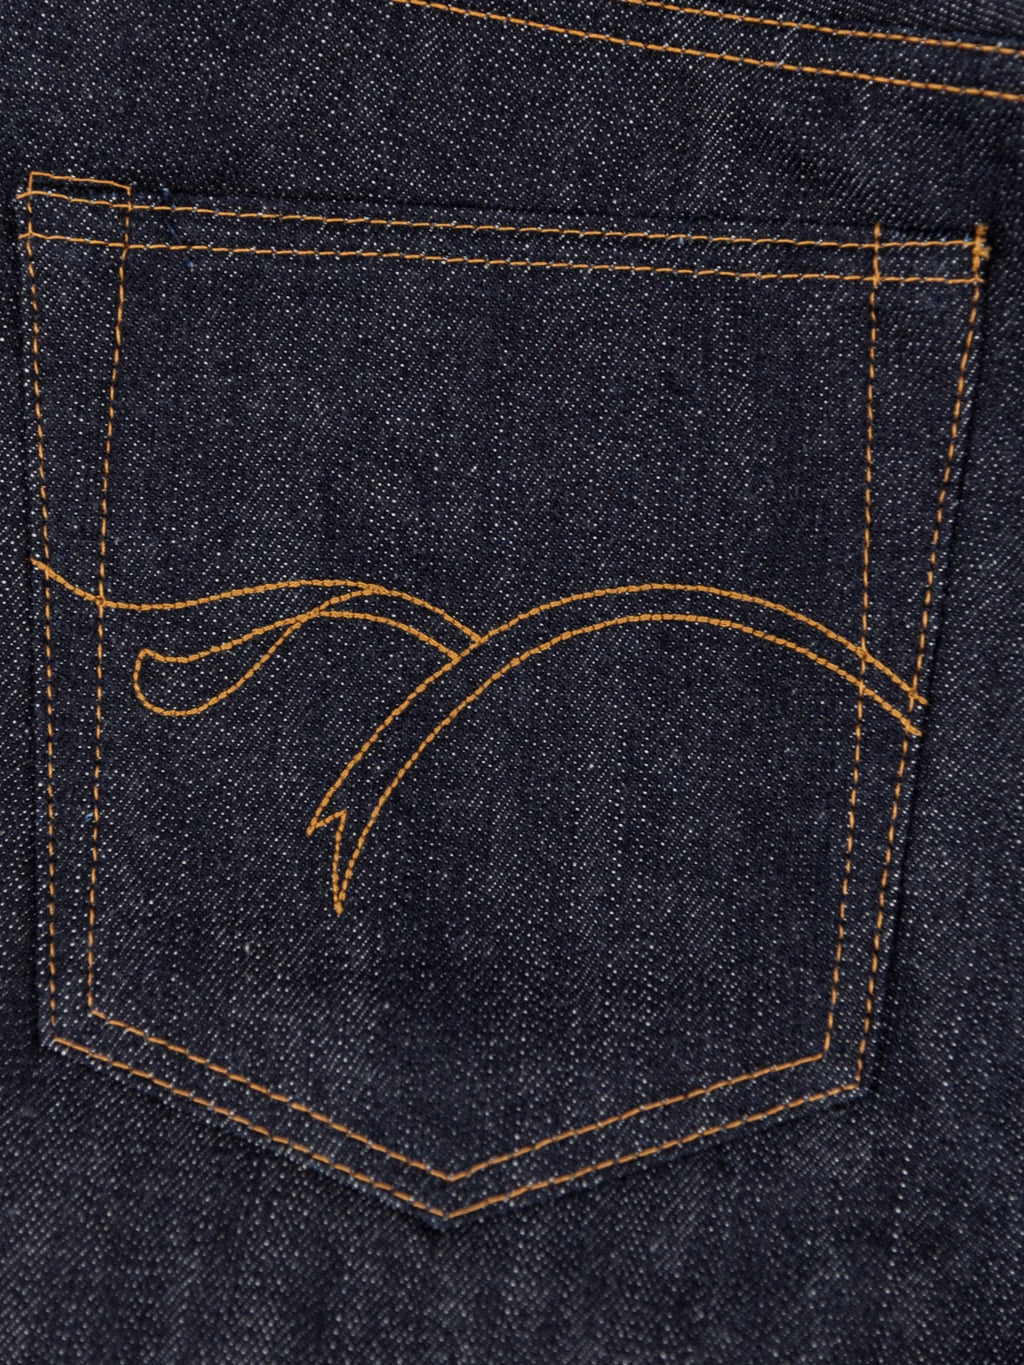 The Flat Head 3009 14.5oz straight tapered Jeans pocket stitching